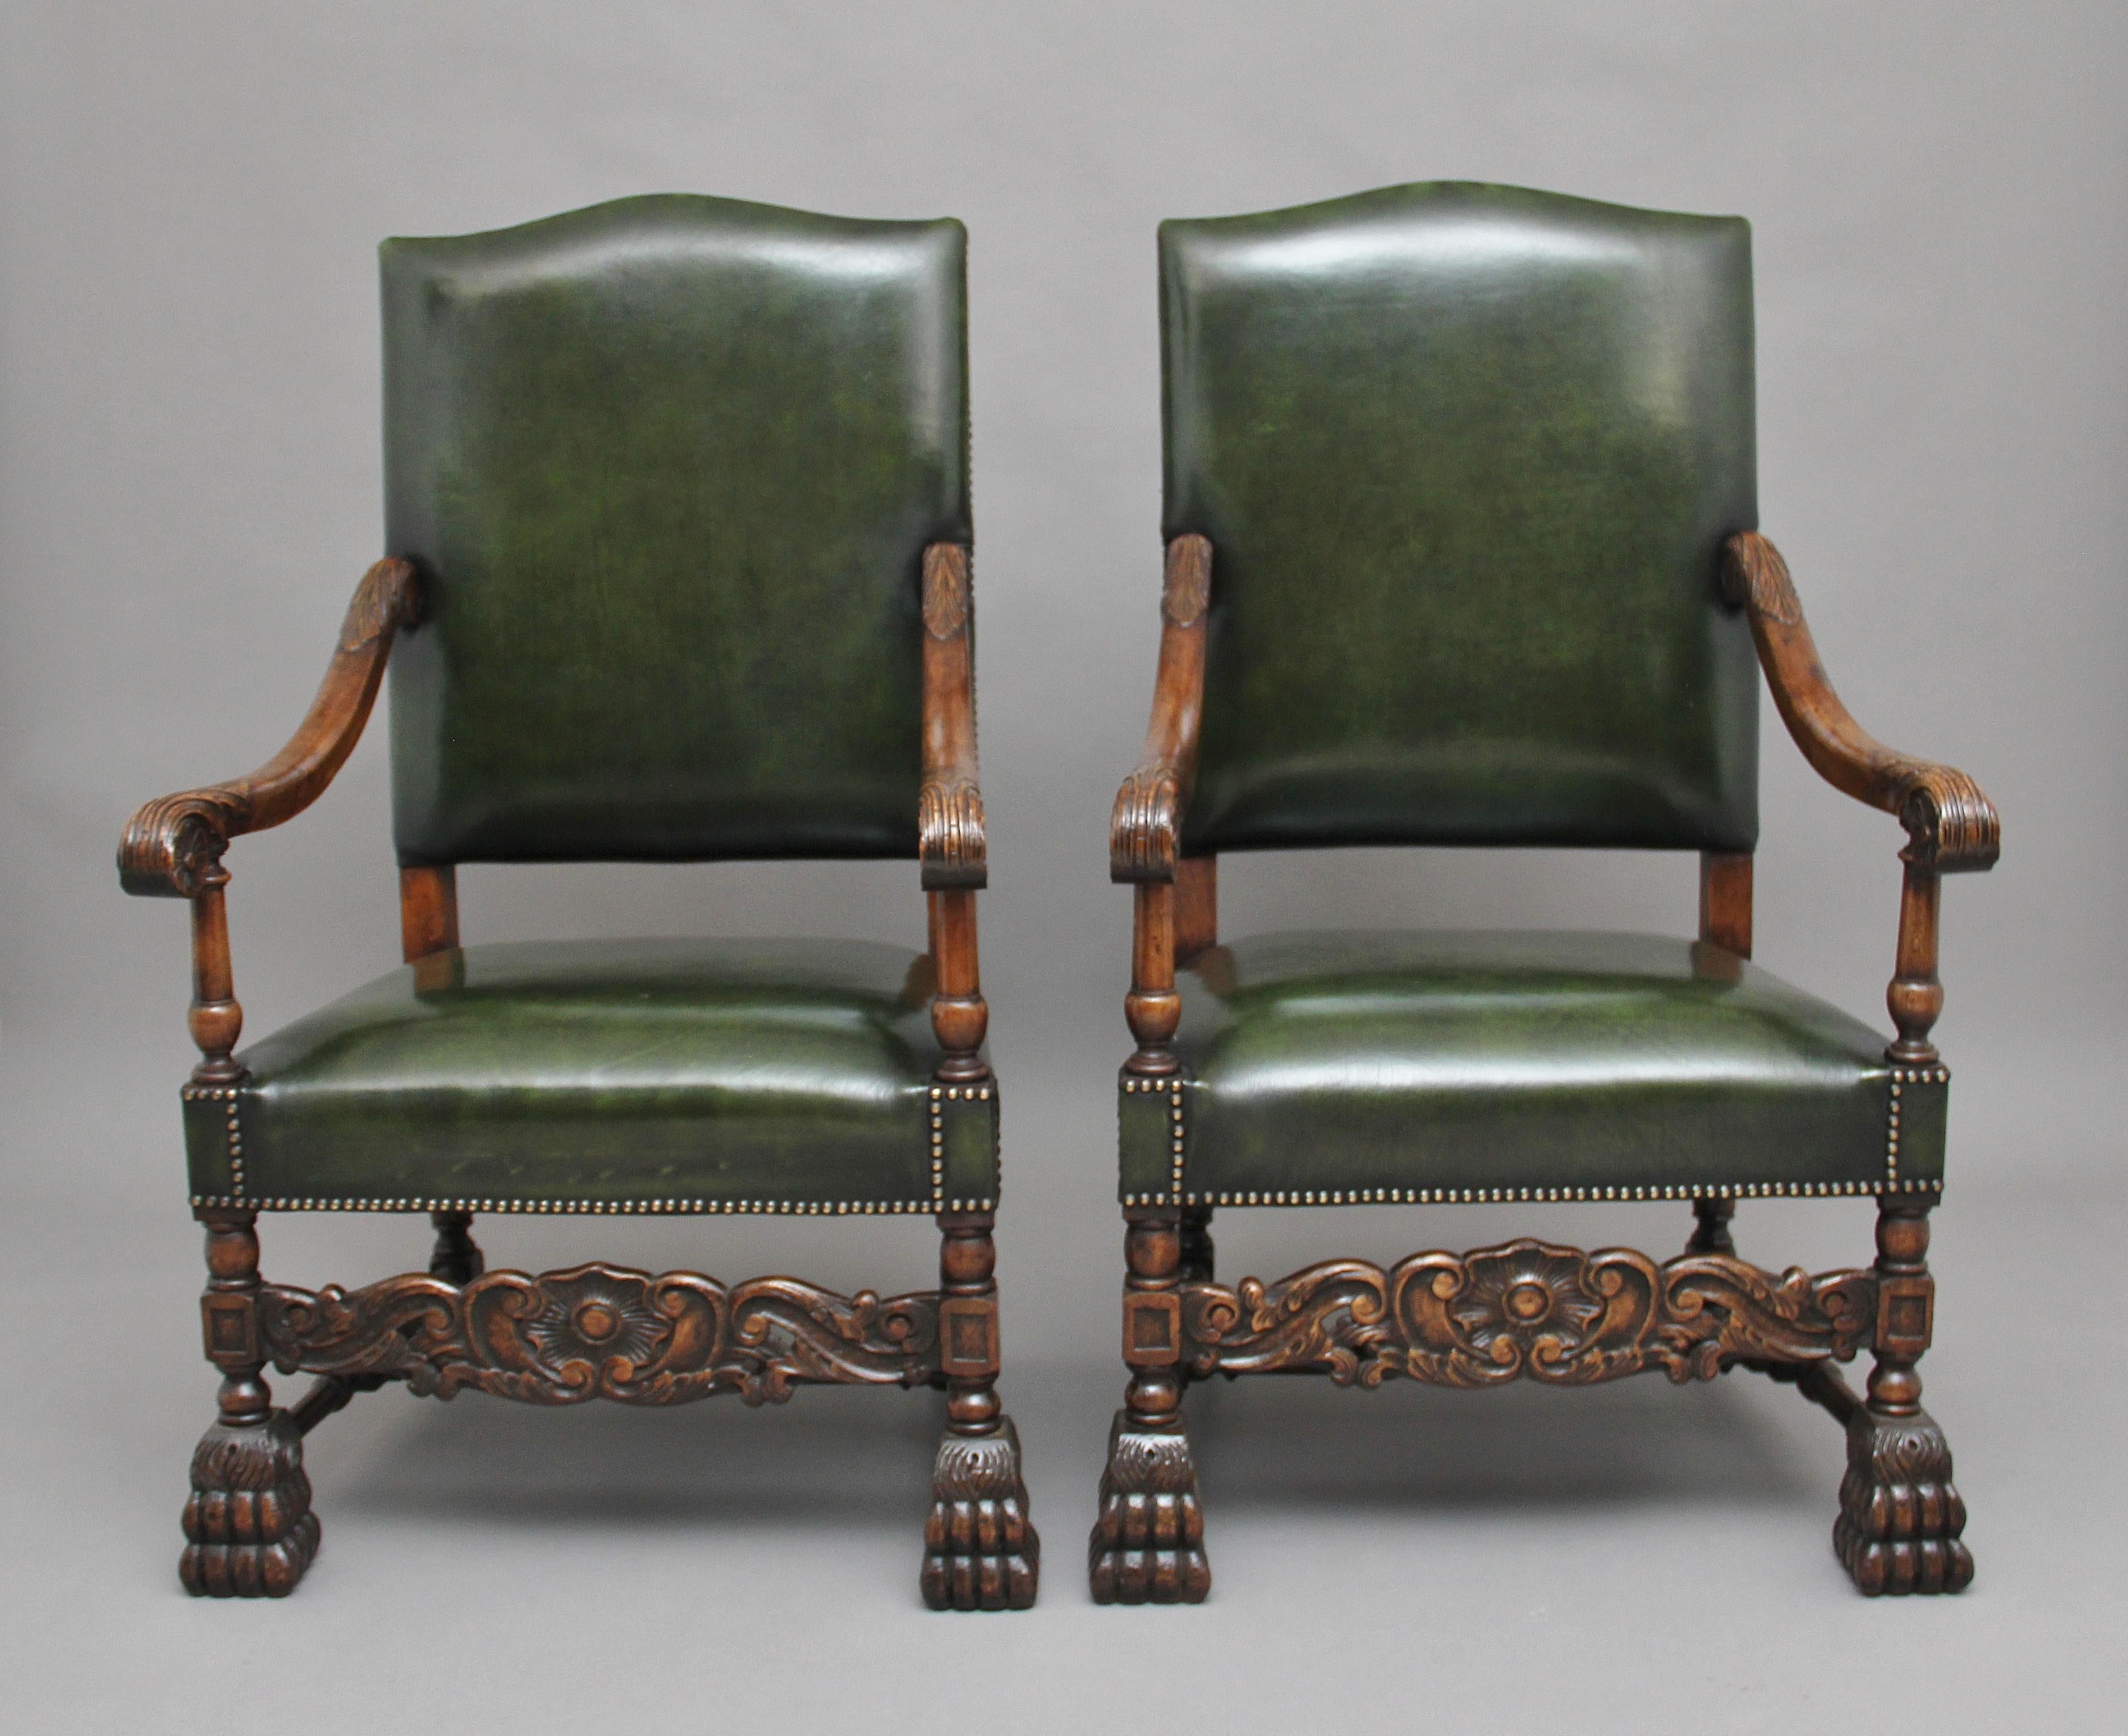 A decorative pair of early 20th century carved armchairs in the Carolean style, upholstered in green leather with brass stud decoration, shaped and carved arms with acanthus leaf decoration with finely turned arm supports, standing on bold carved